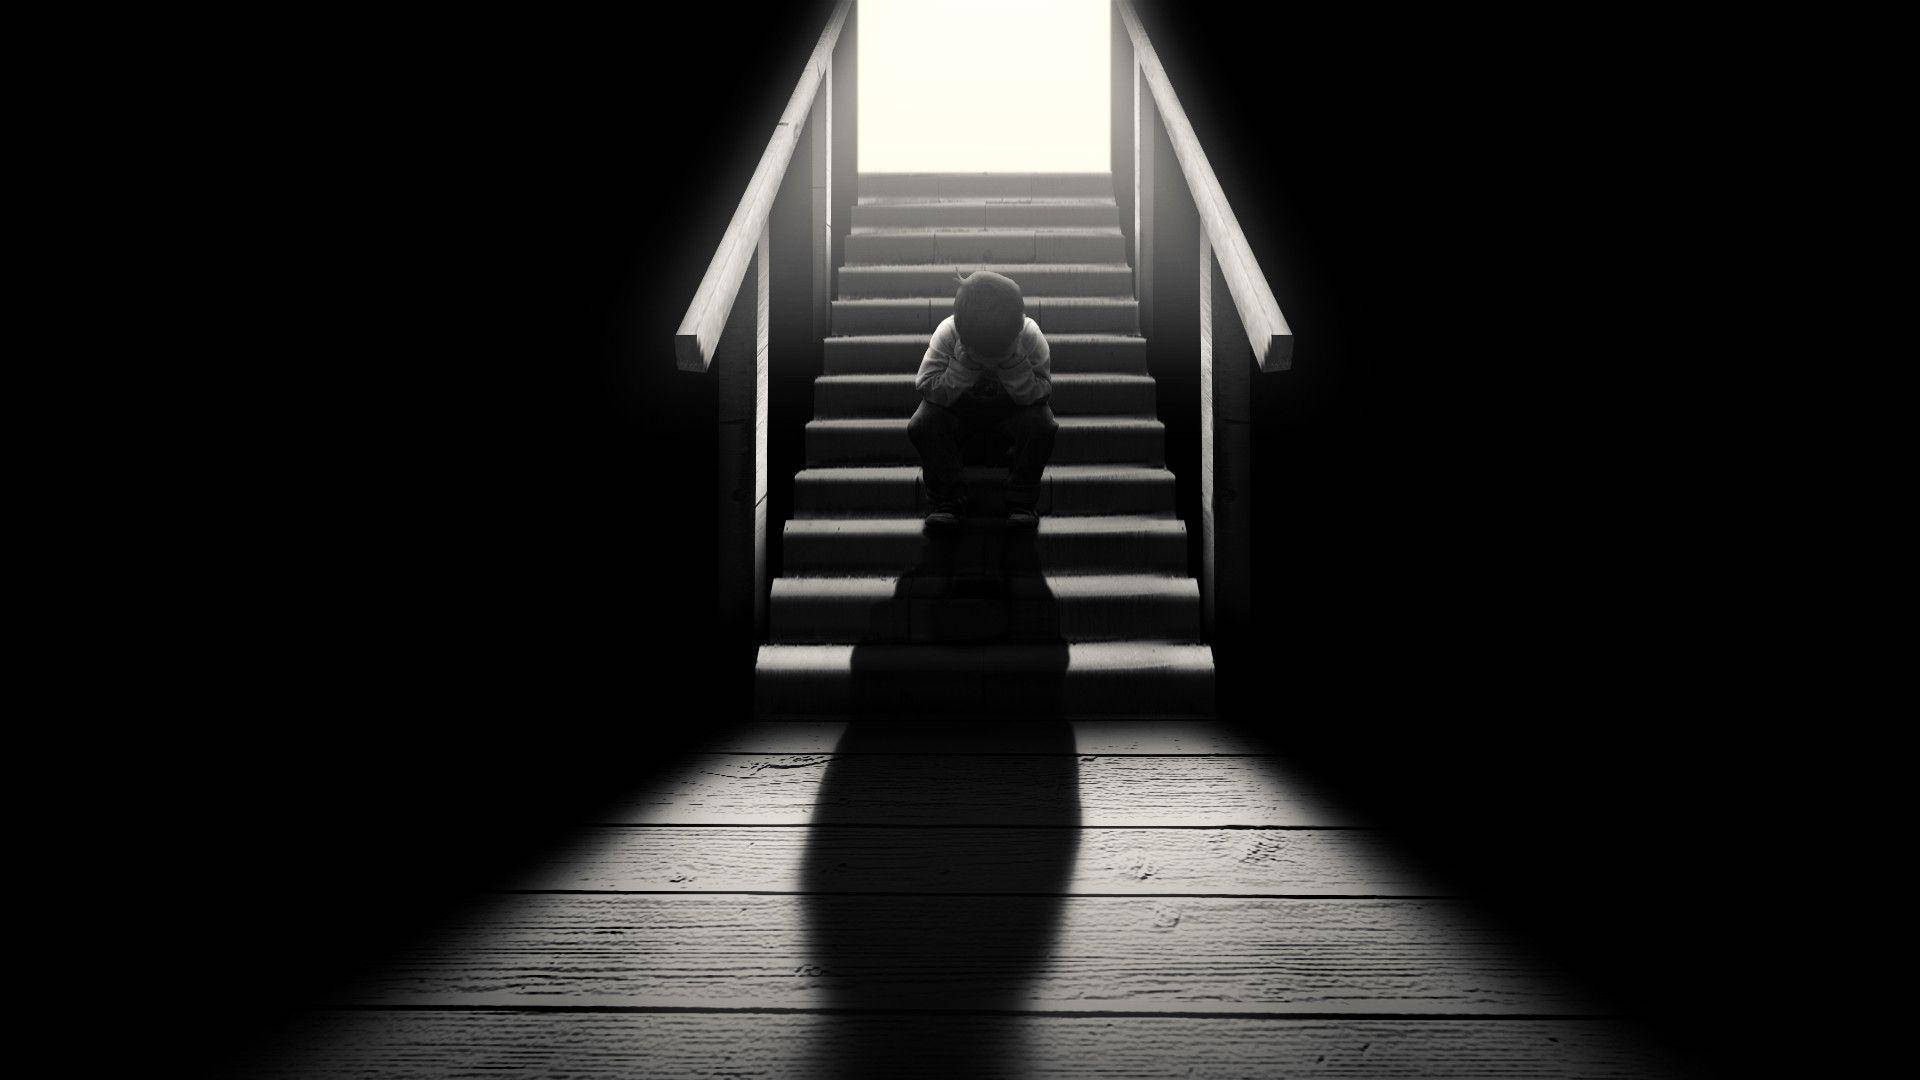 Dark Loneliness: A Solitary Figure On A Staircase Background